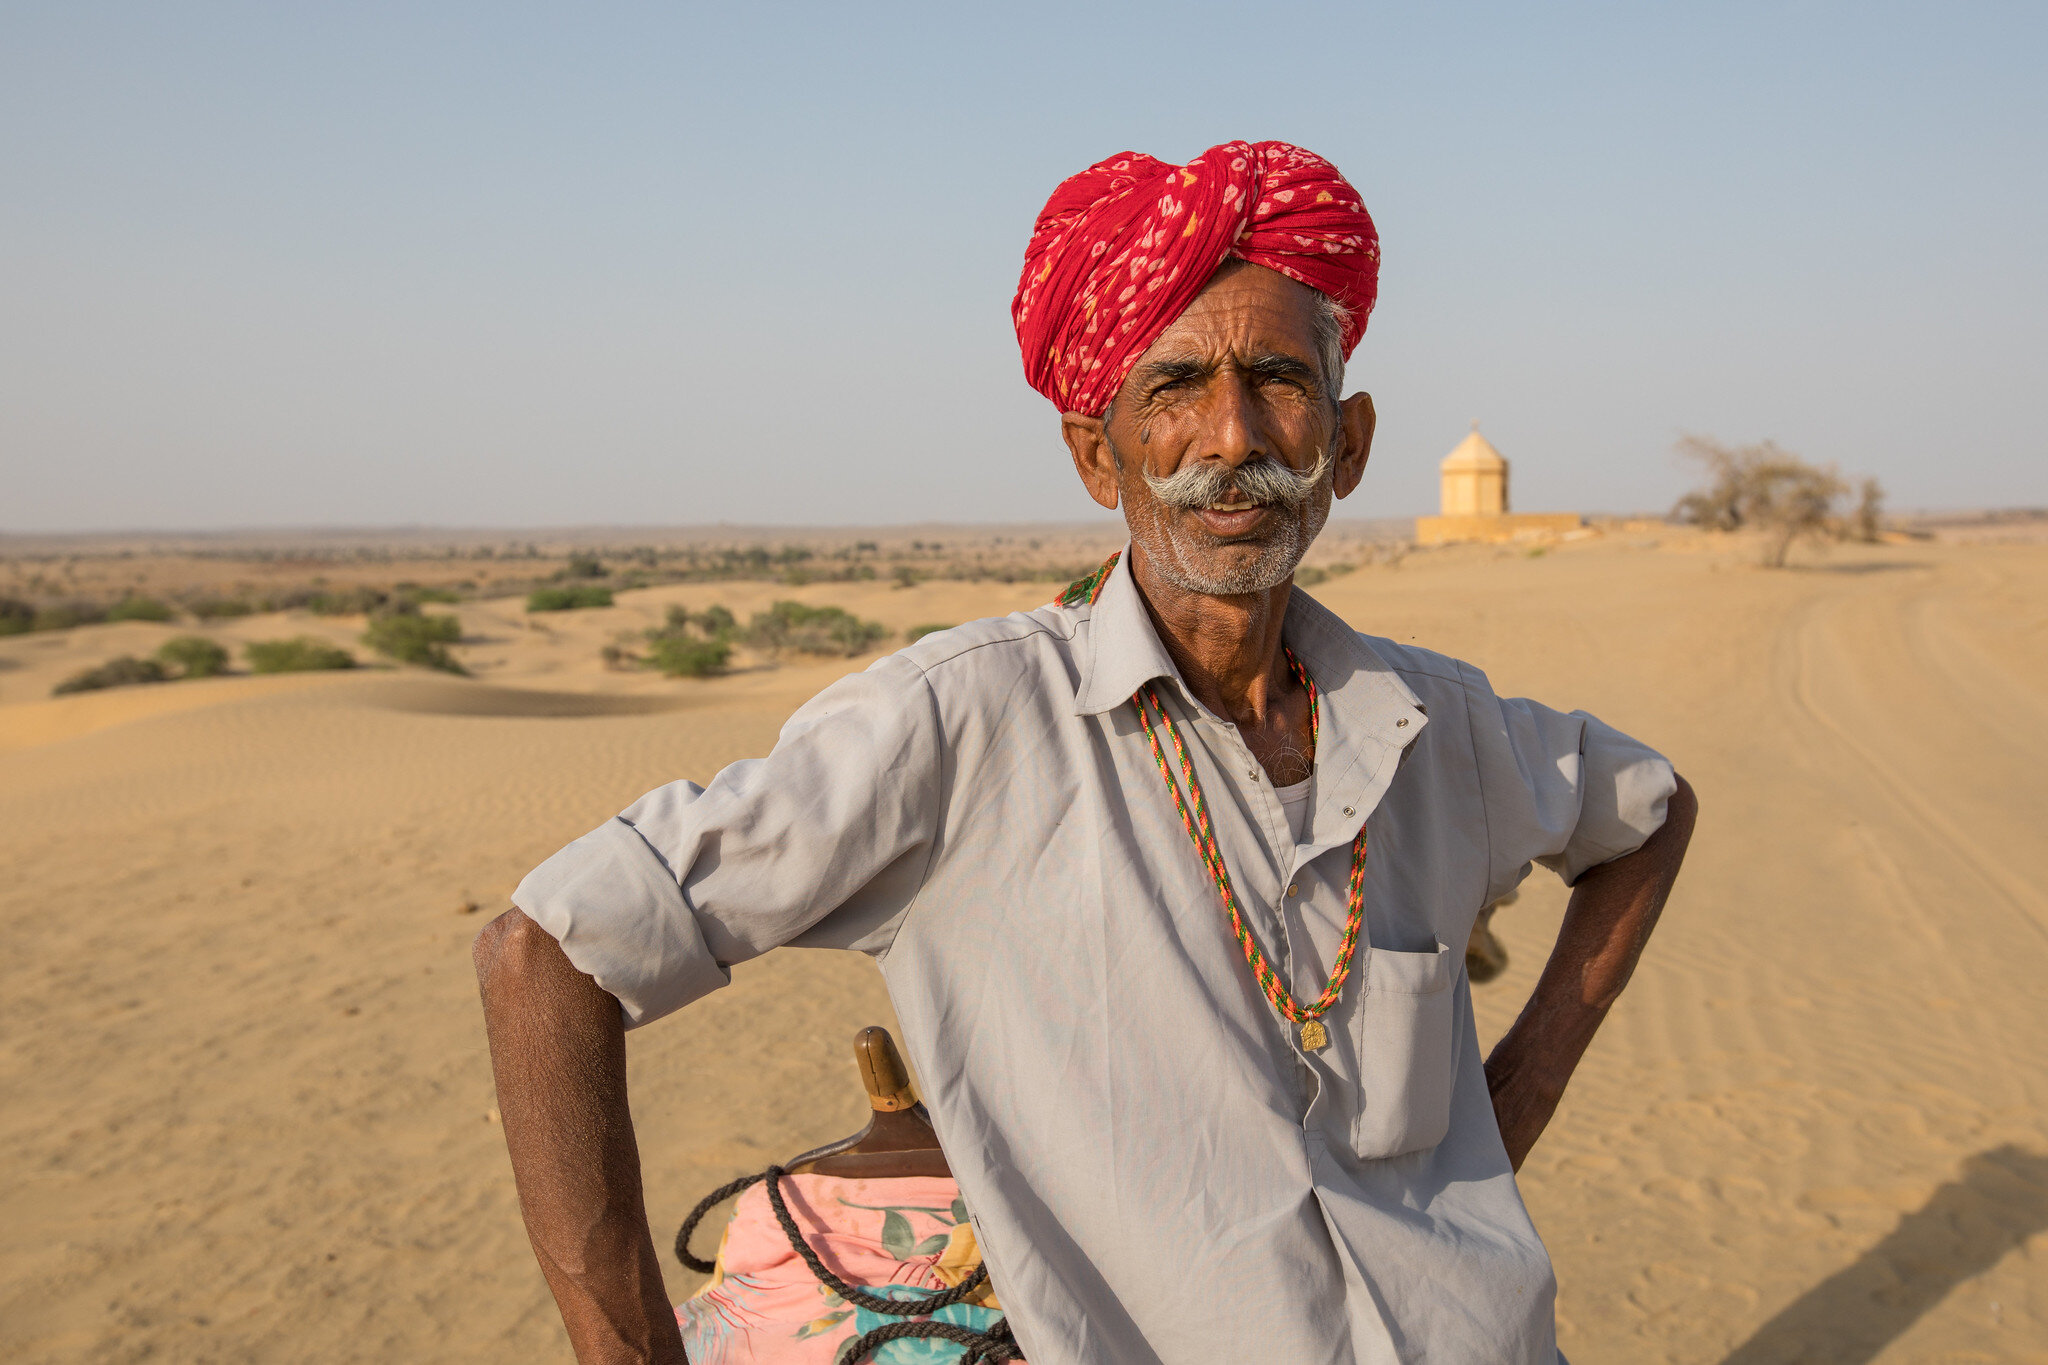 A Camel herder poses for a photo in the Thar Desert.